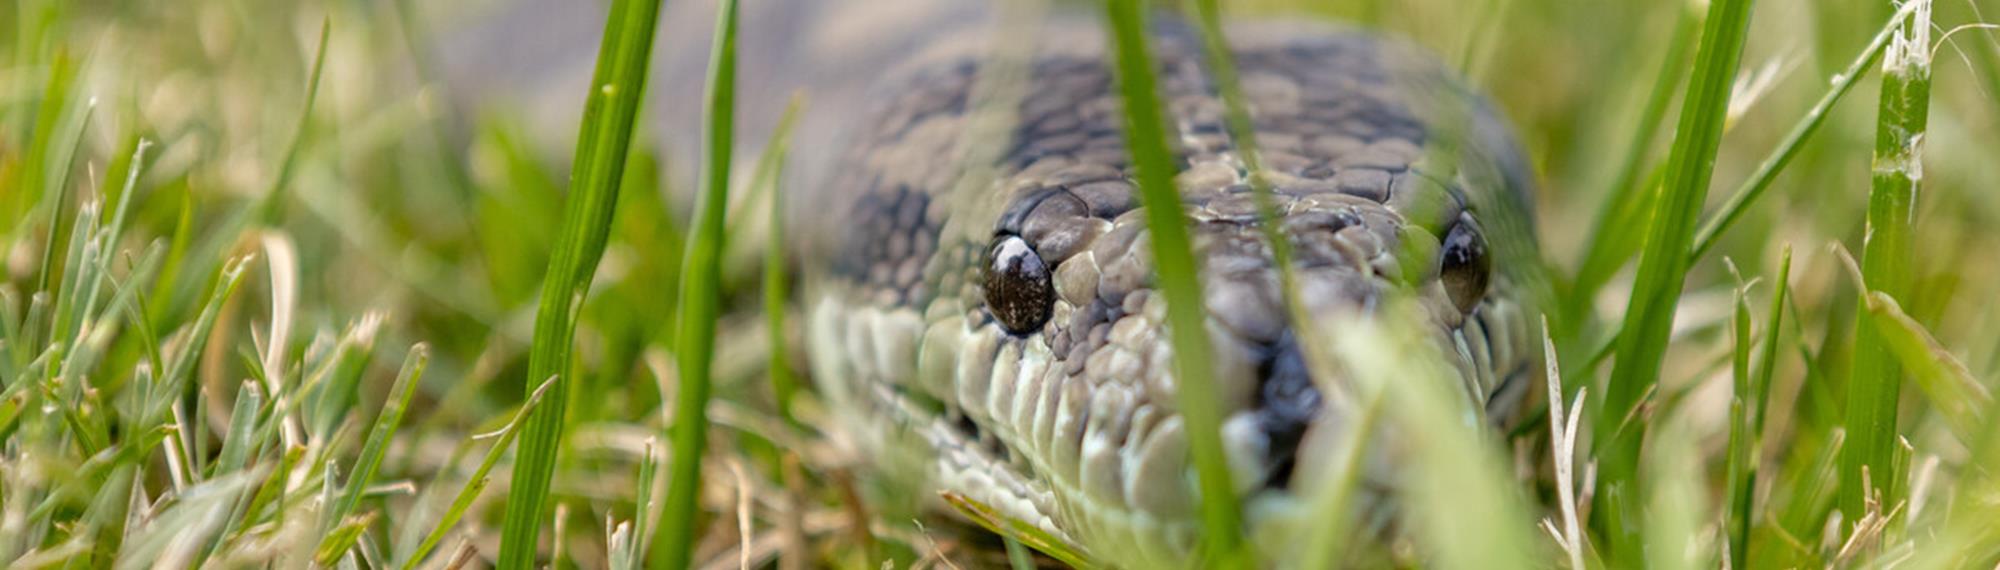 Close up of a snake in grass